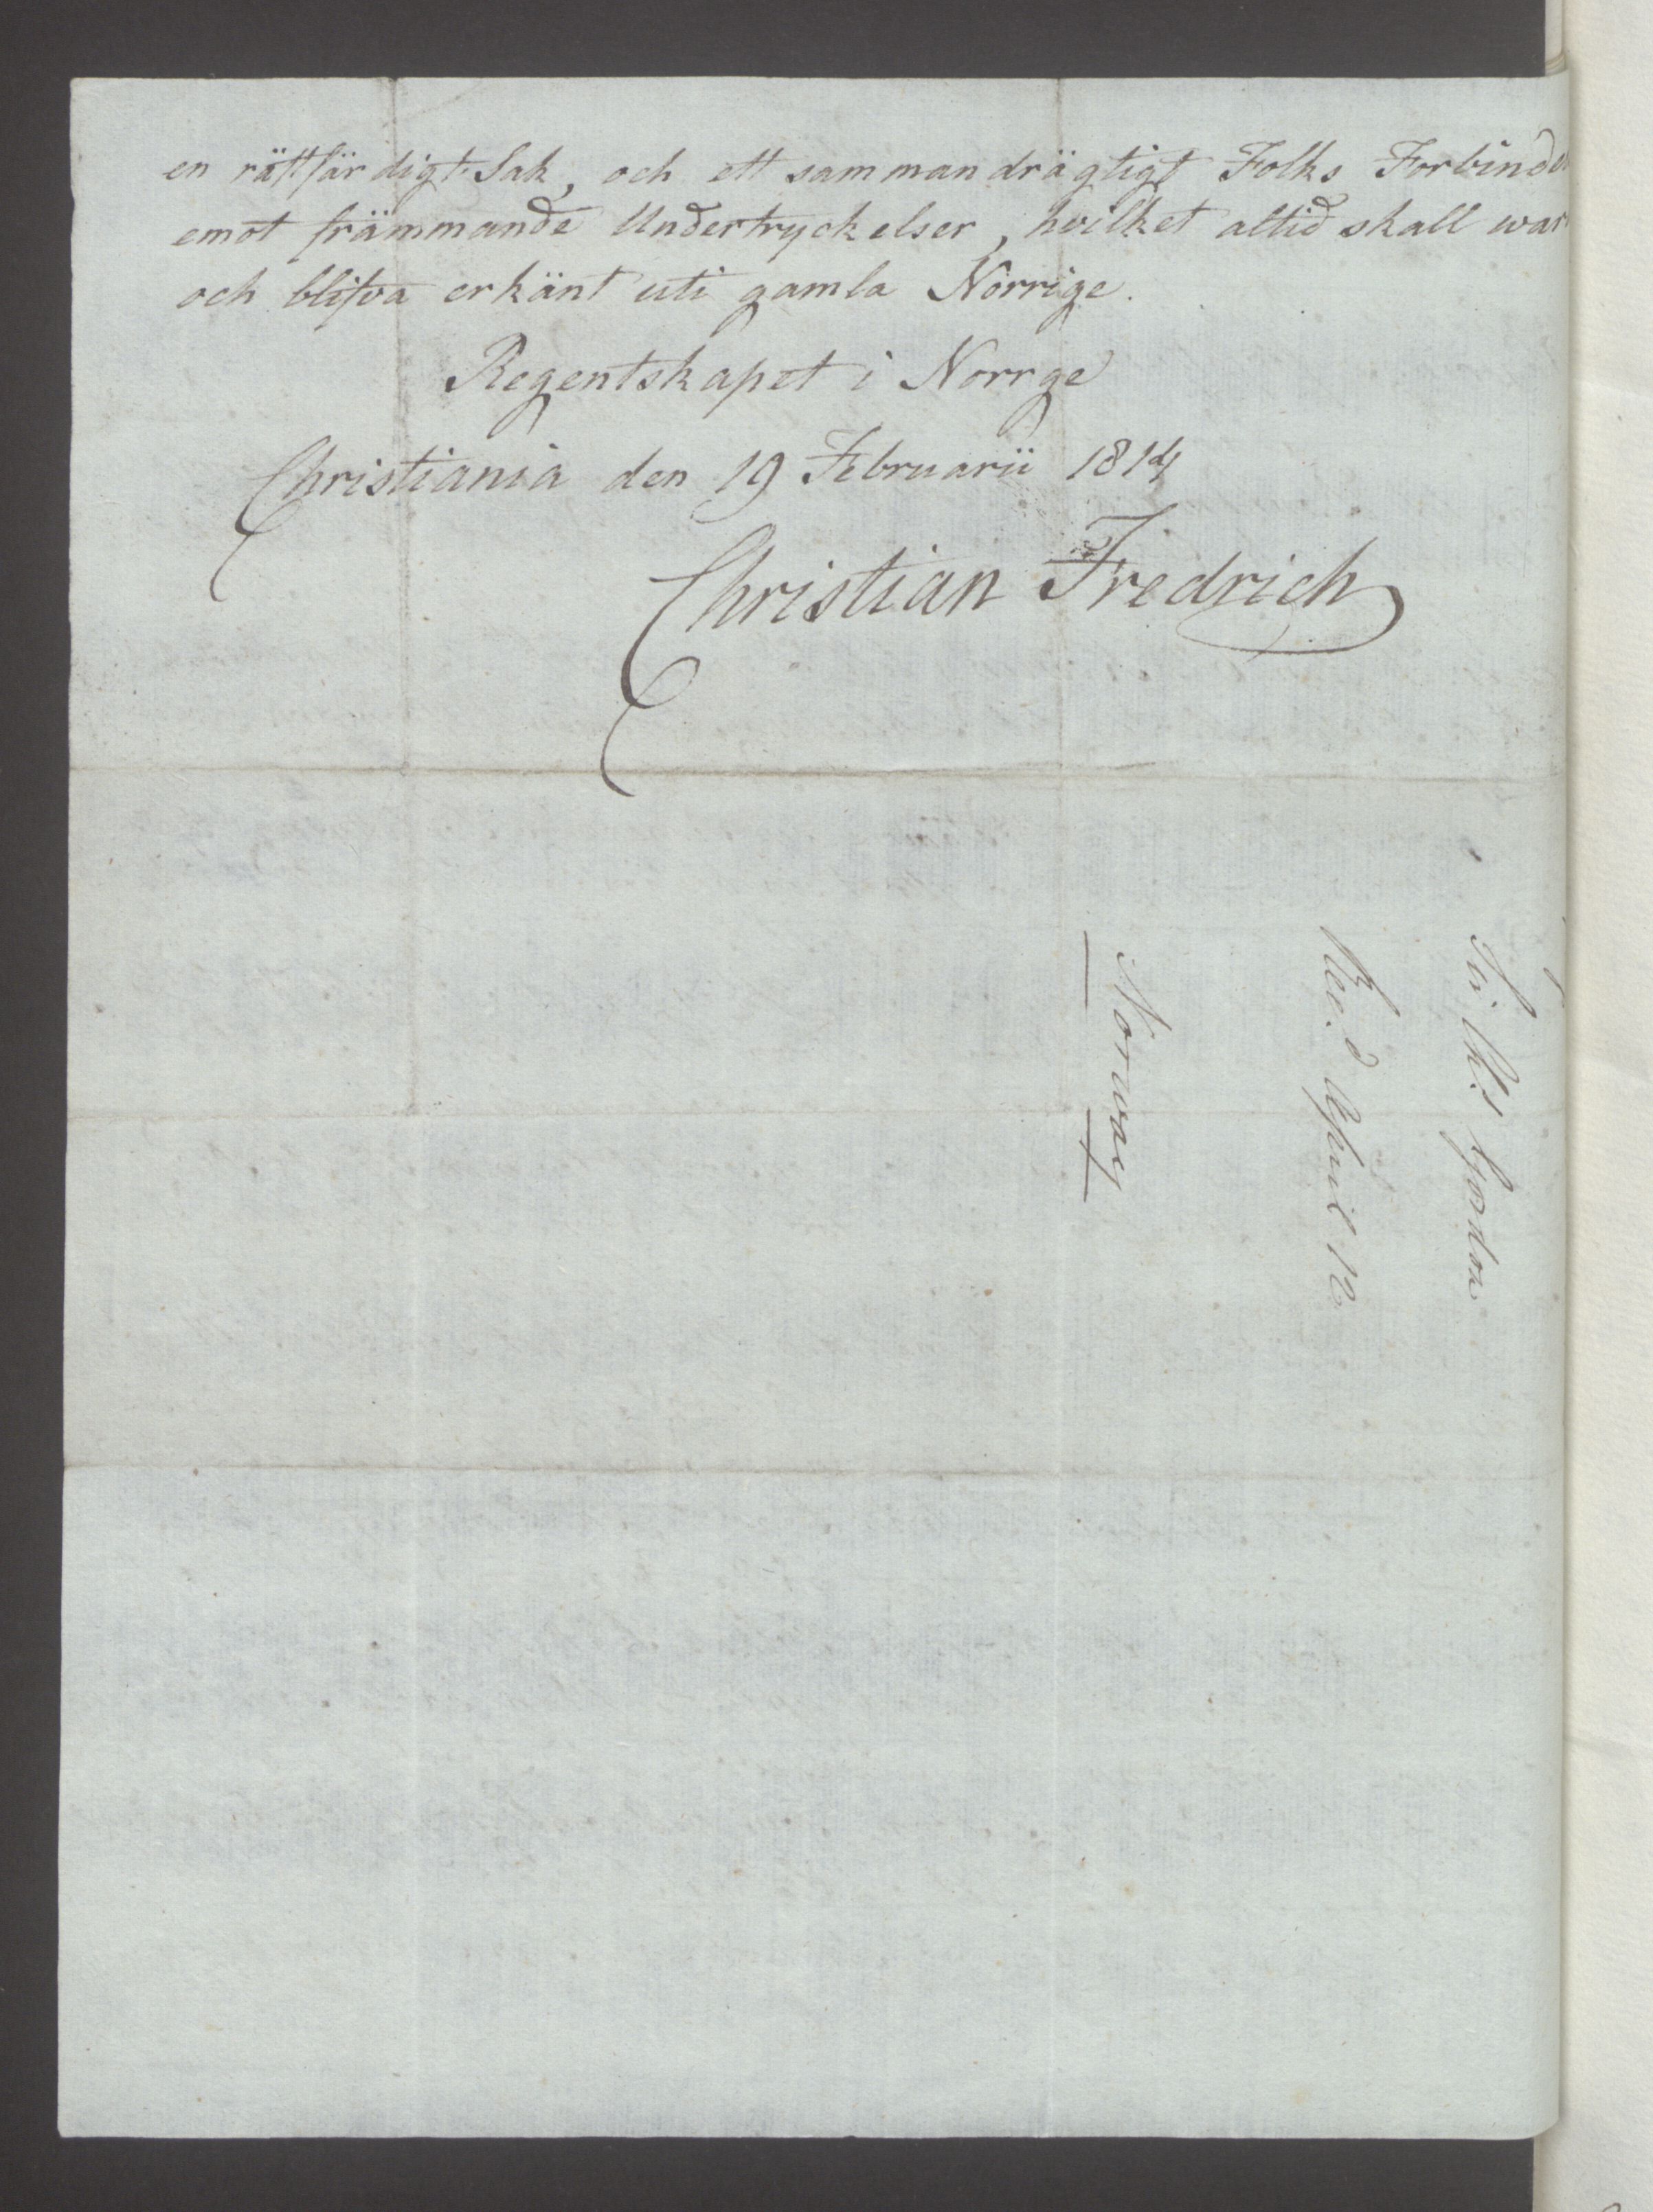 Foreign Office*, UKA/-/FO 38/16: Sir C. Gordon. Reports from Malmö, Jonkoping, and Helsingborg, 1814, p. 29